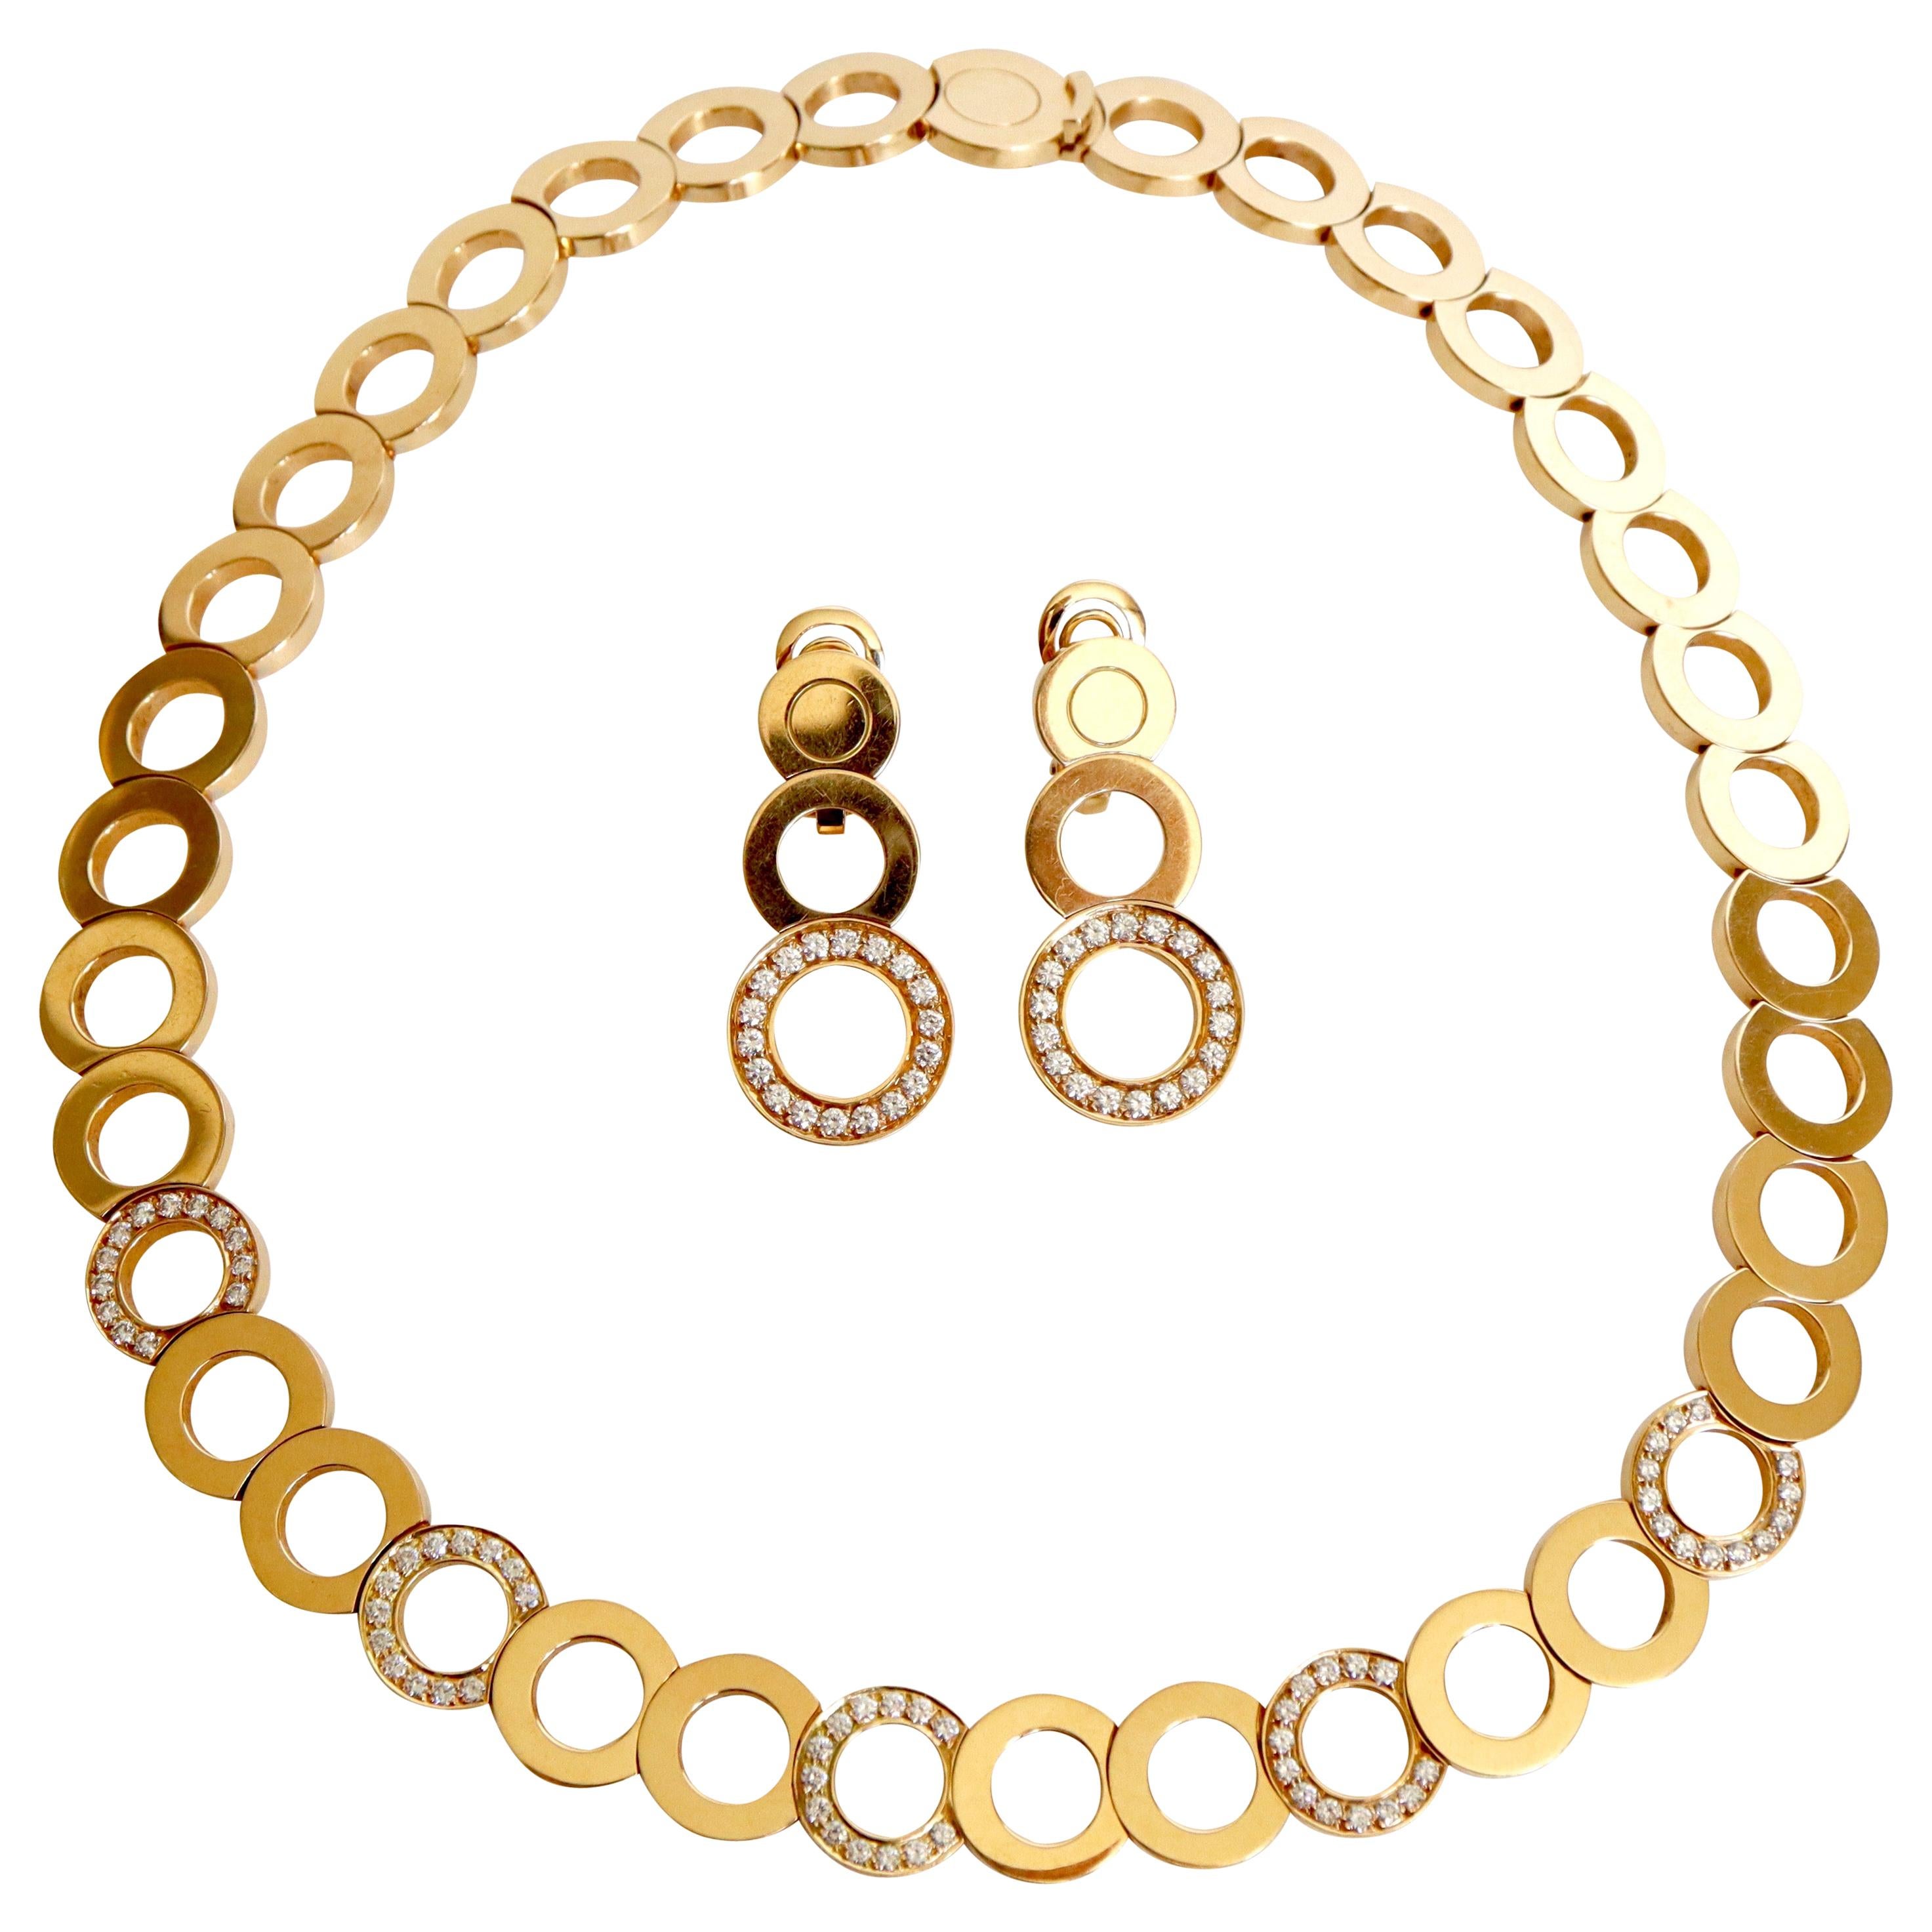 O.J. Perrin Set of a Necklace and Earrings in 18 Carat Gold and Diamonds For Sale